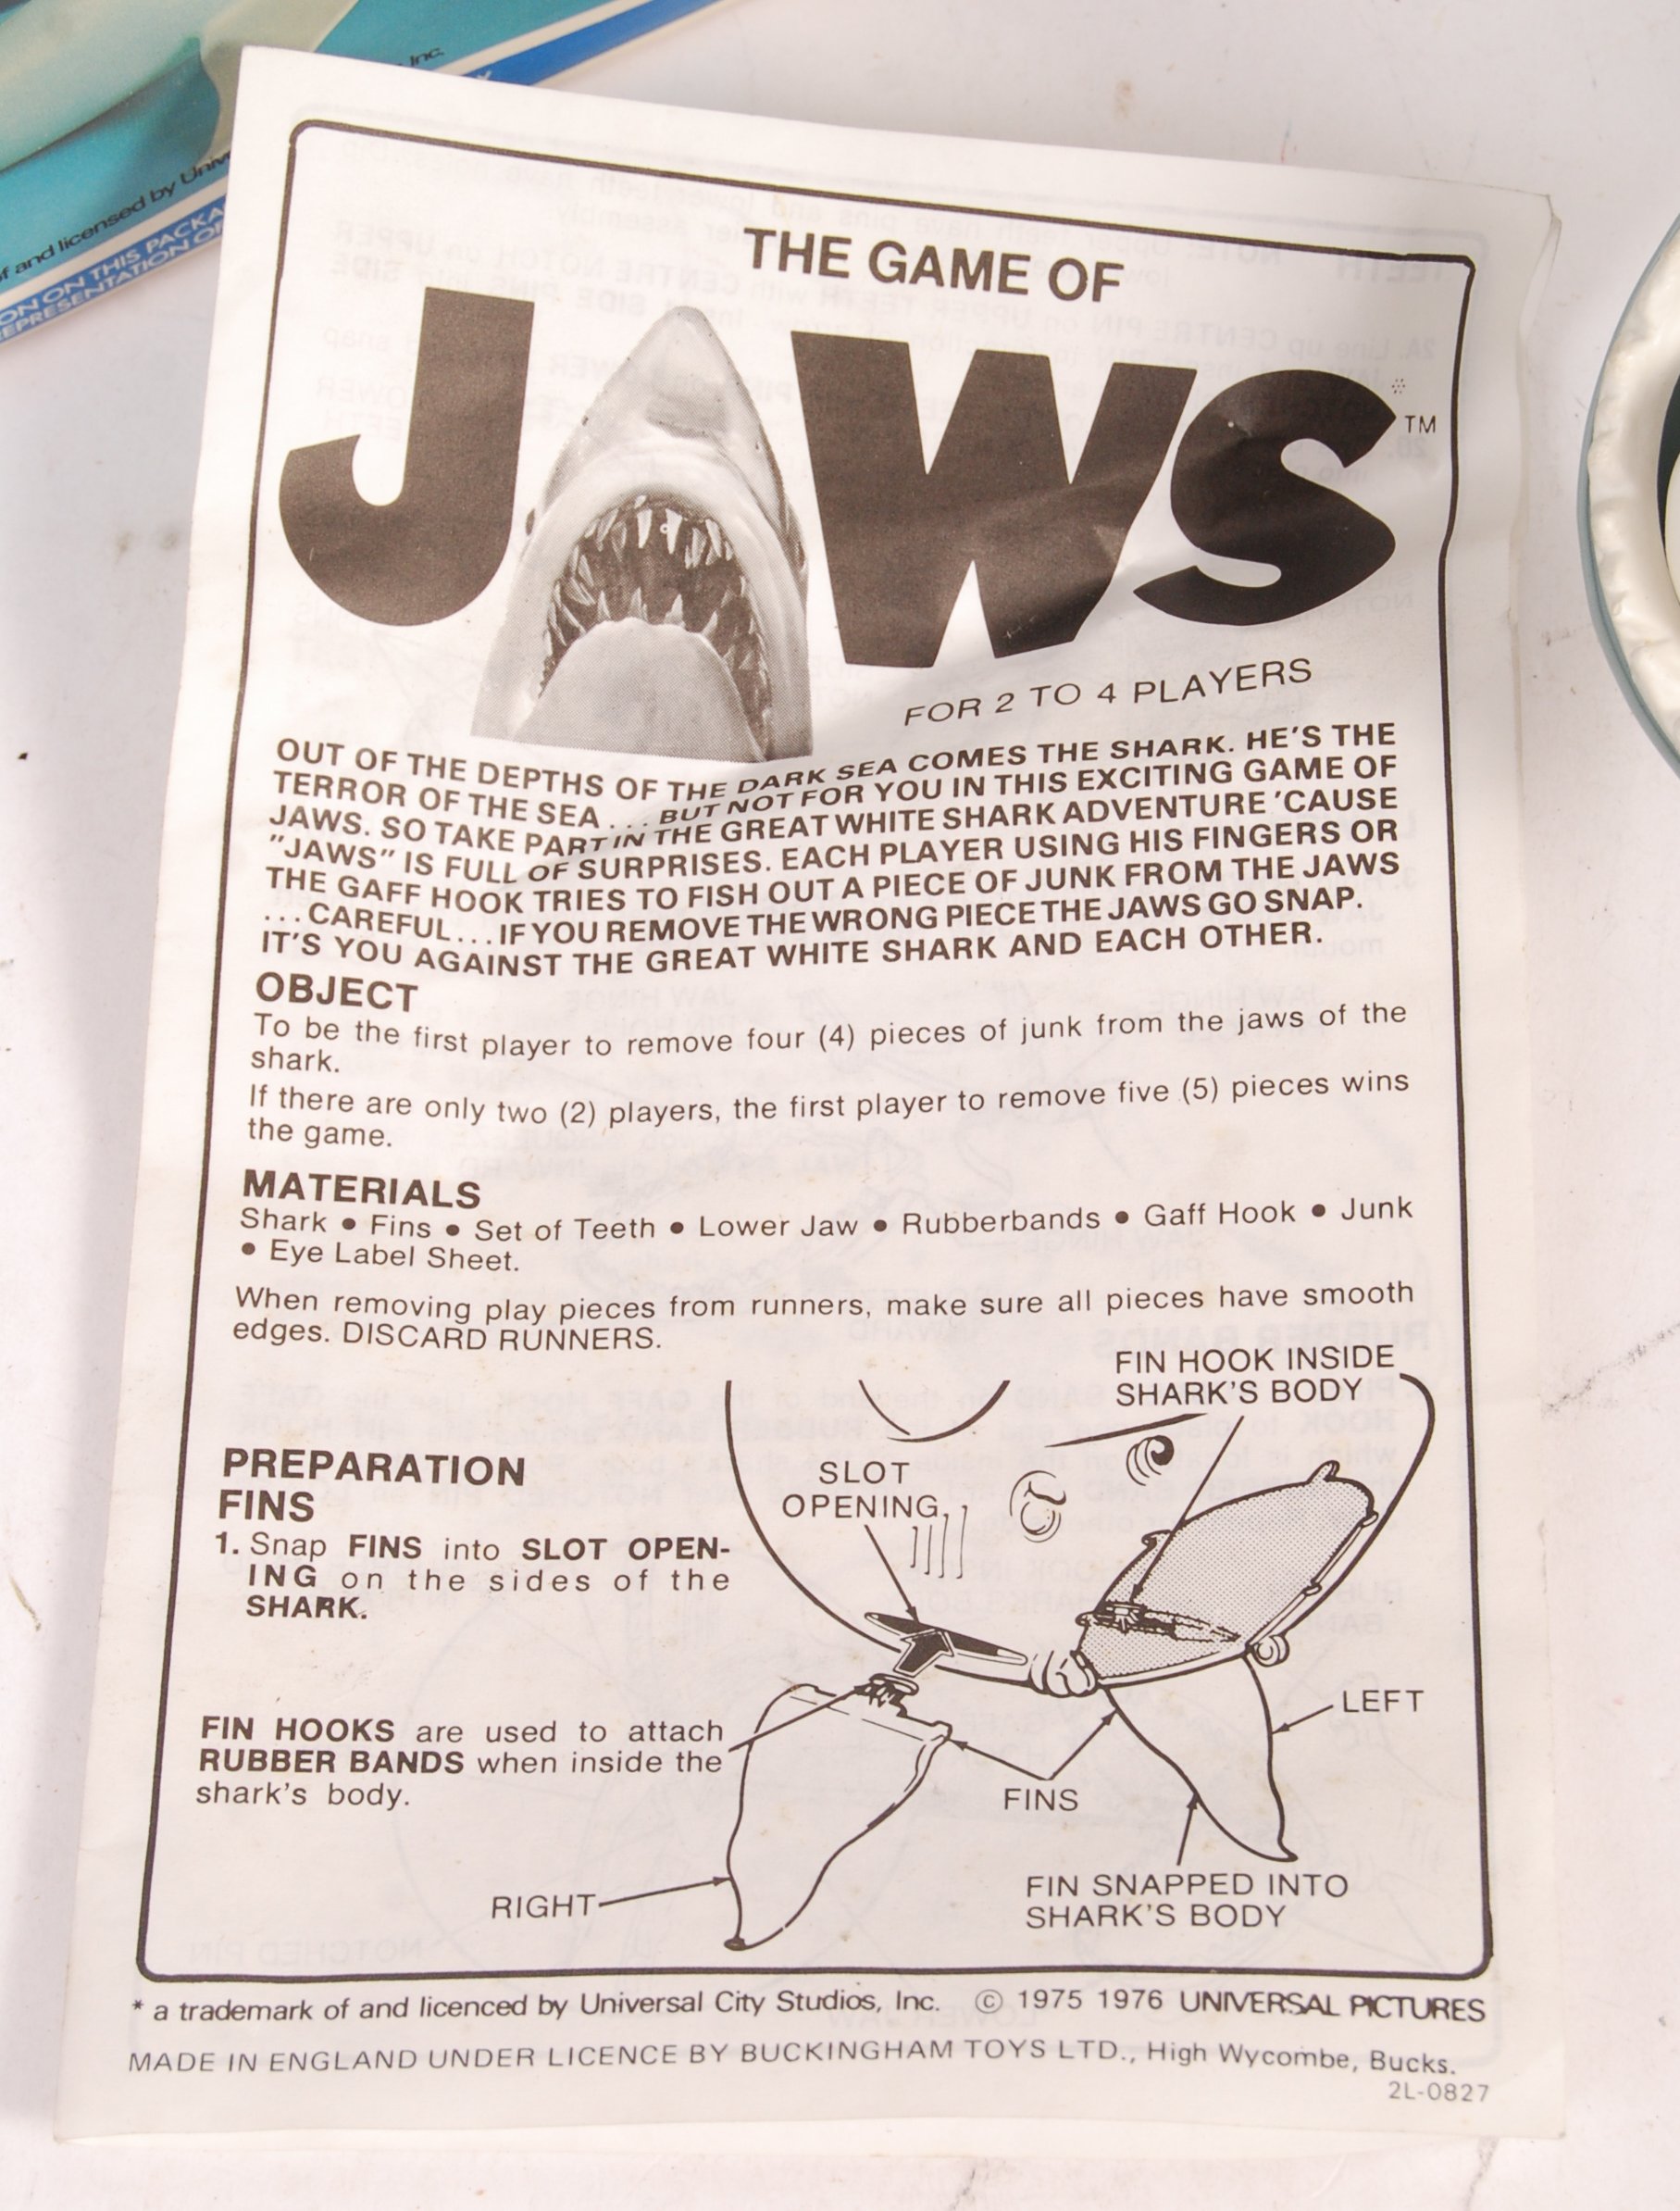 RARE VINTAGE ' THE GAME OF JAWS ' MOVIE TIE-IN GAME BY IDEAL - Image 4 of 4